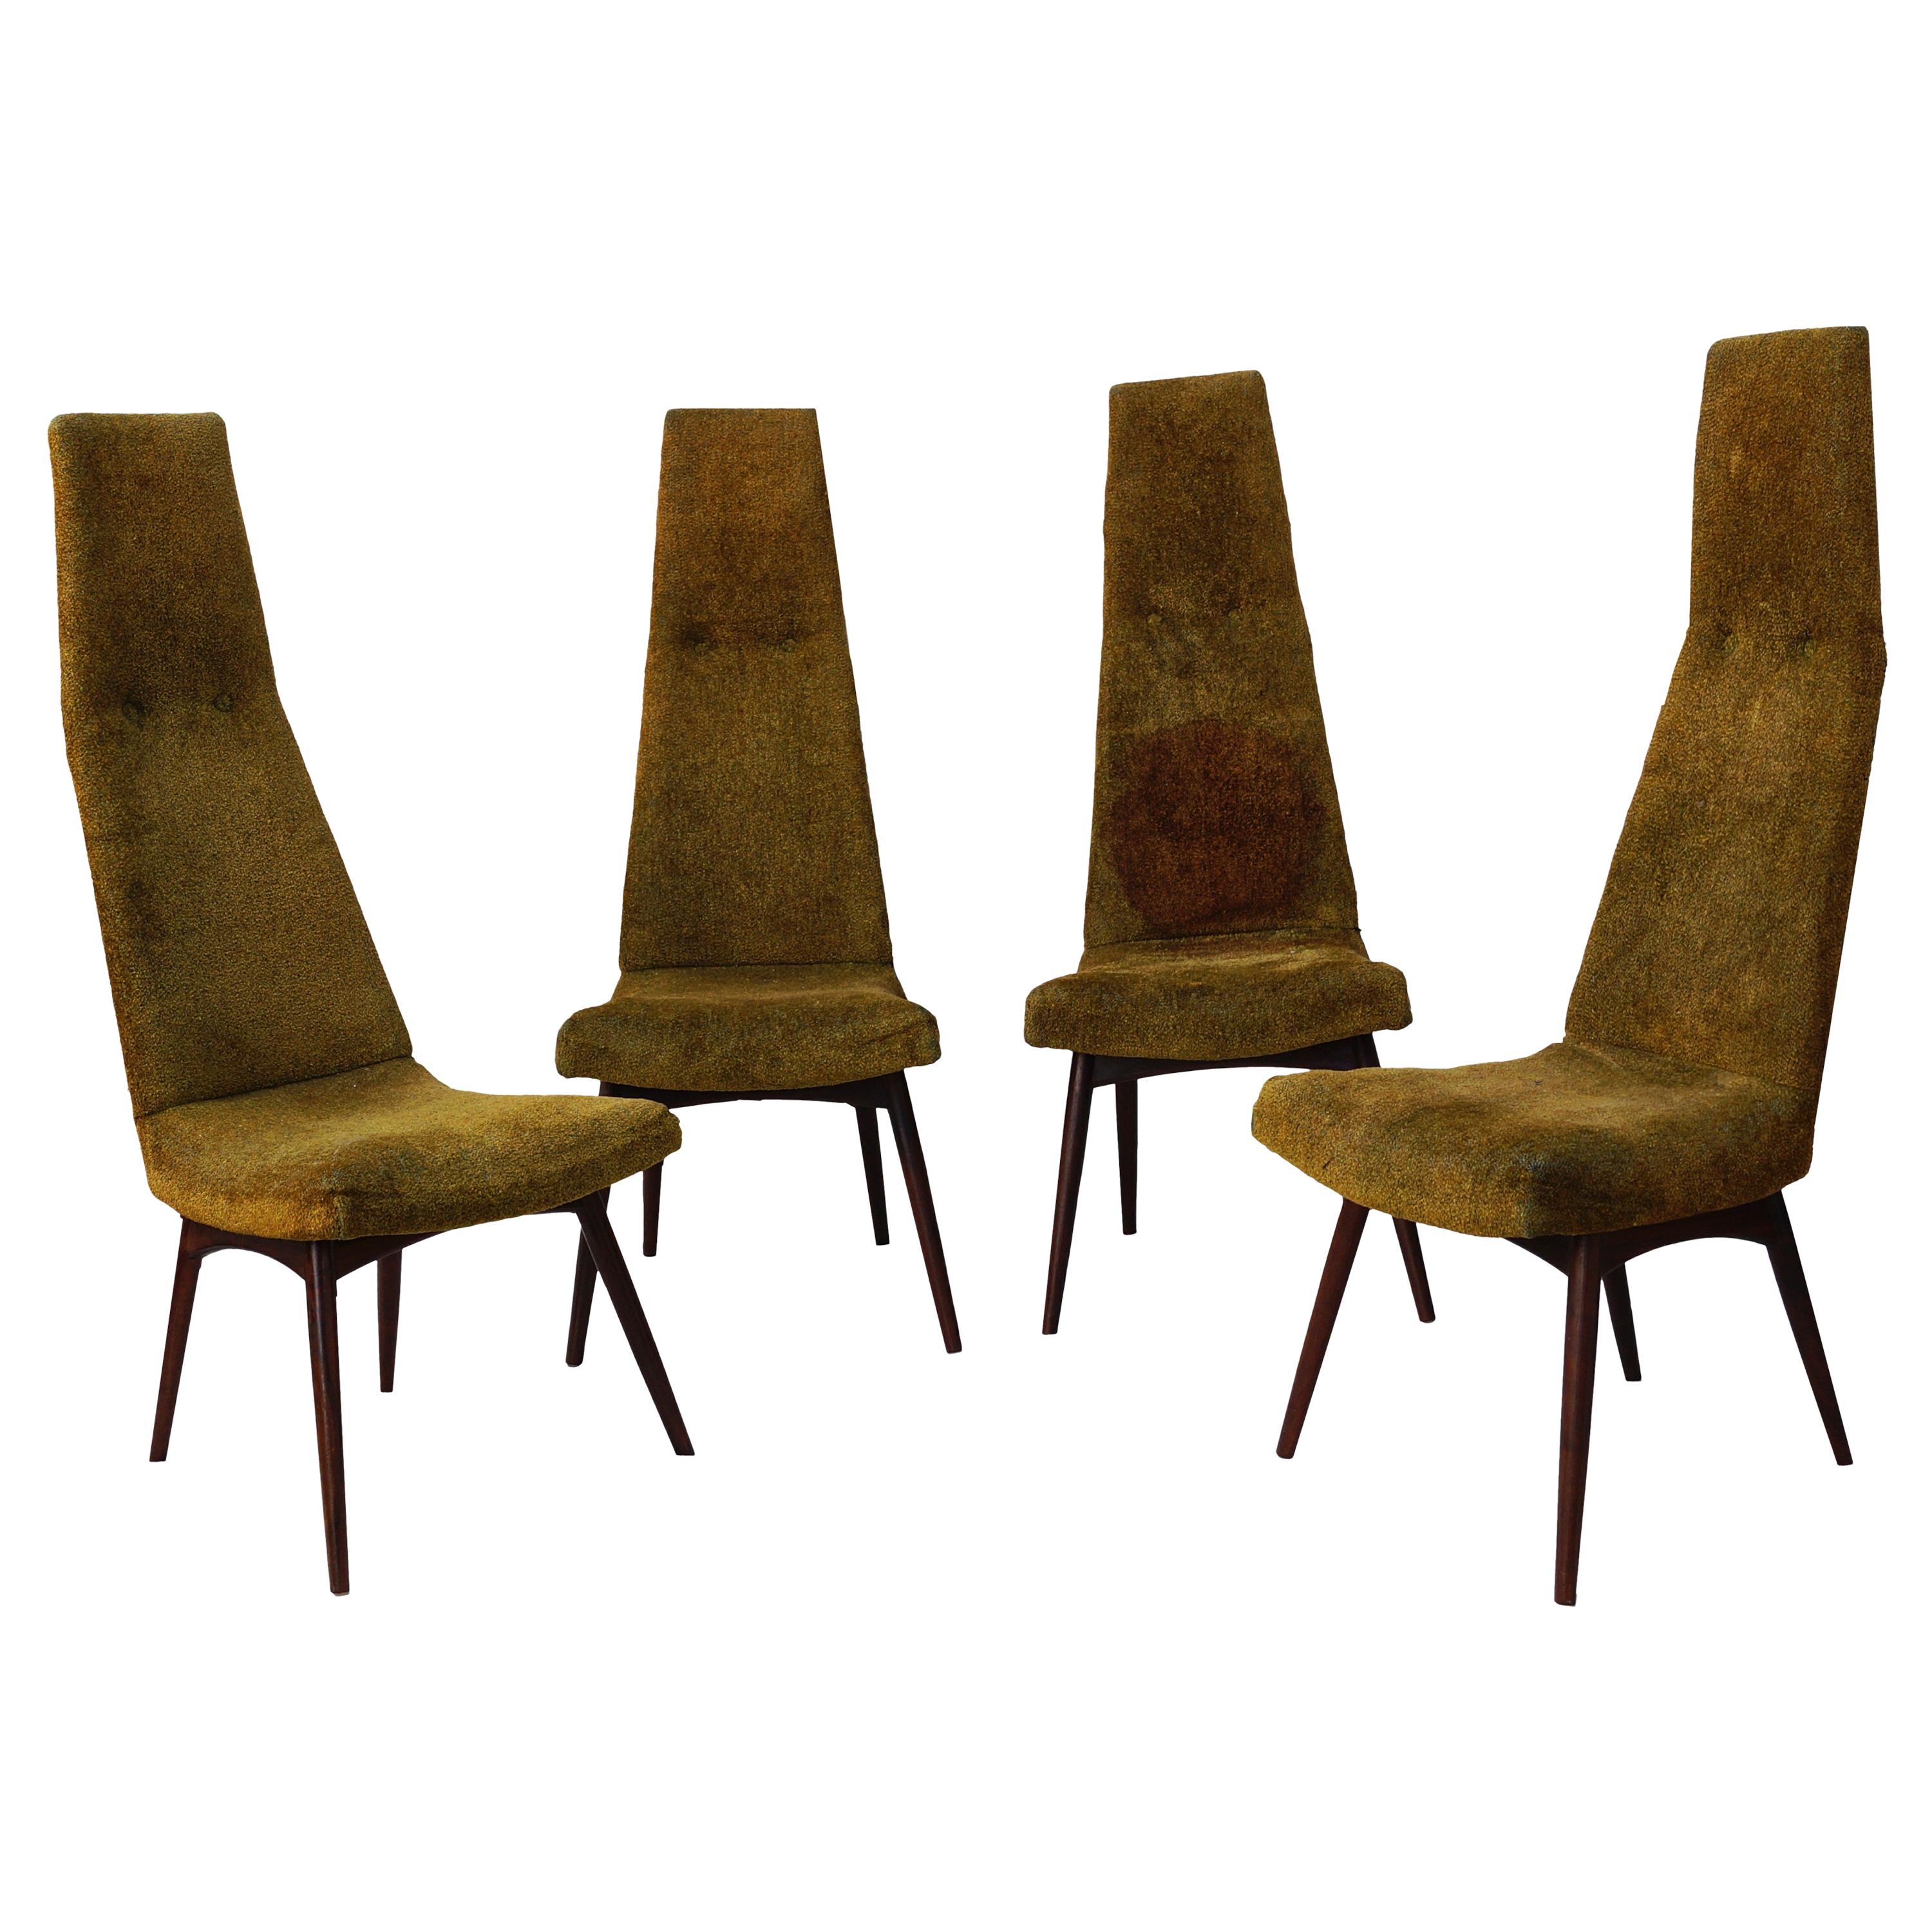 Set of Four Adrian Pearsall High Back Dining Chairs for Craft Associates